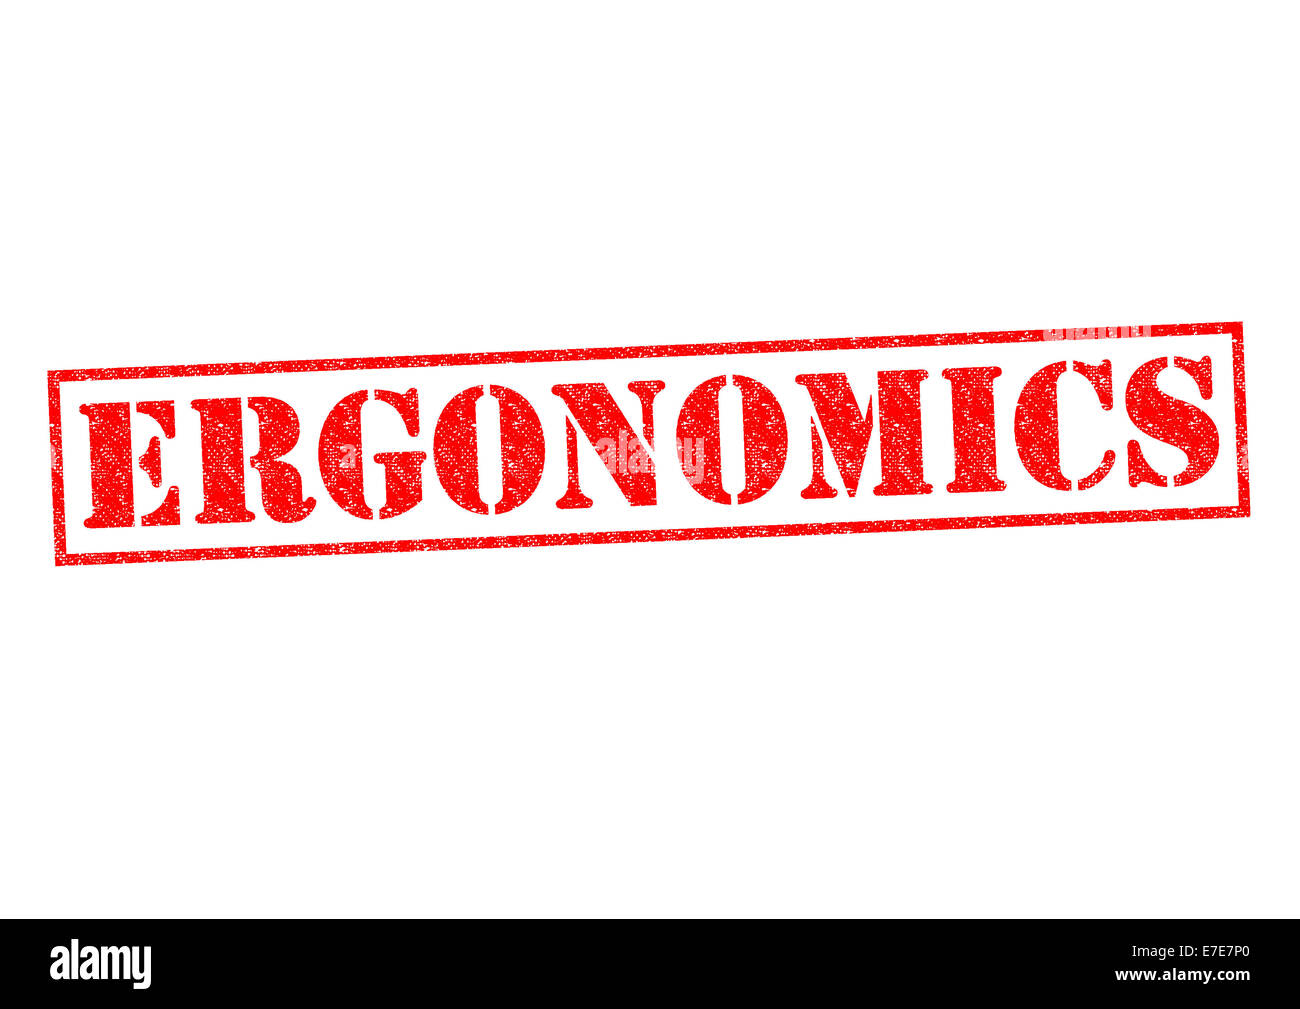 ERGONOMICS red Rubber Stamp over a white background. Stock Photo